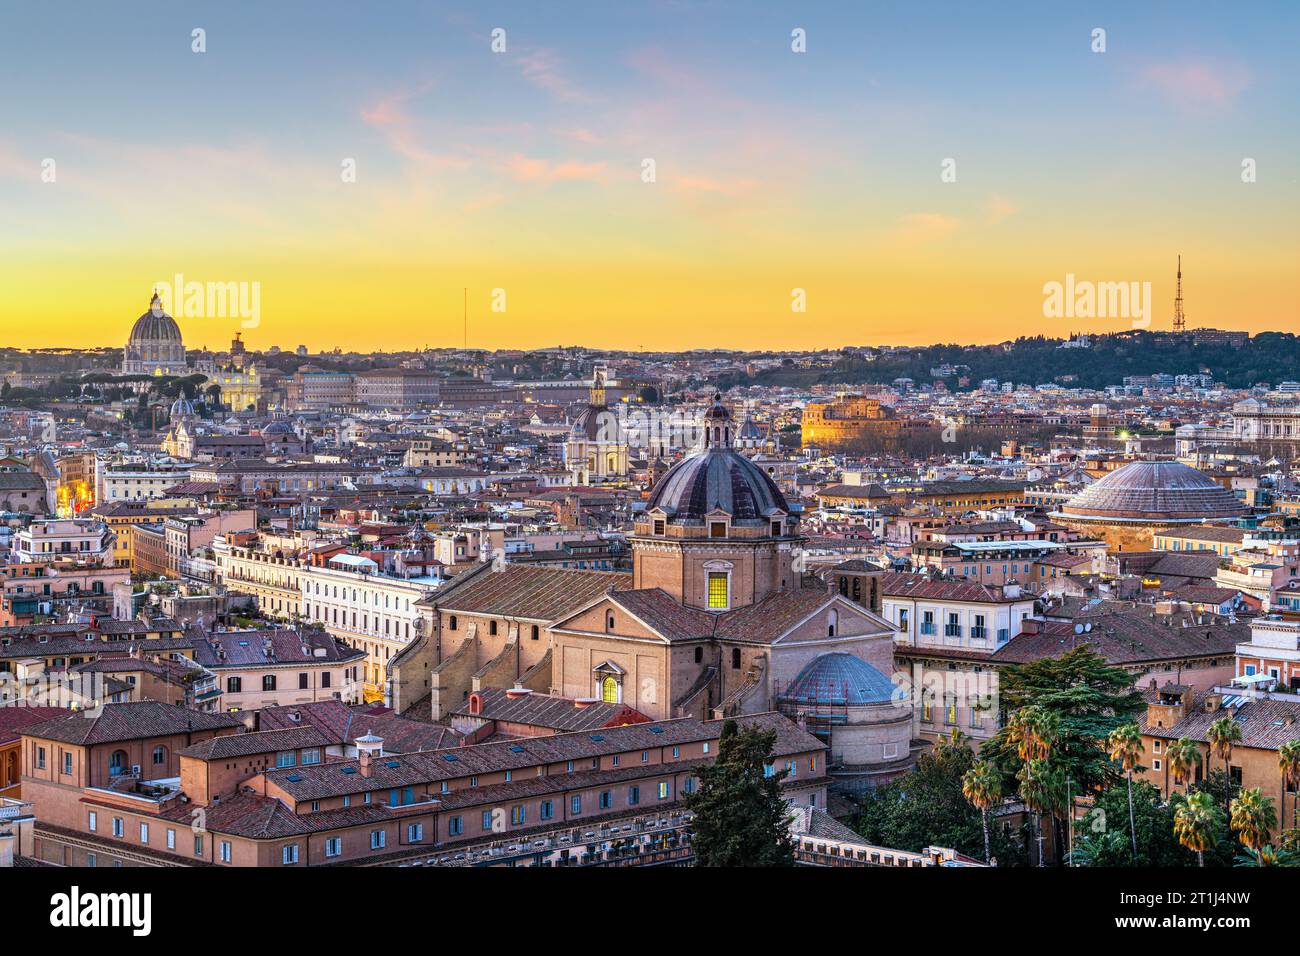 Rome, Italy rooftop cityscape with the Pantheon, Castel Sant'Angelo, the Vatican, and other historic landmarks at dusk. Stock Photo